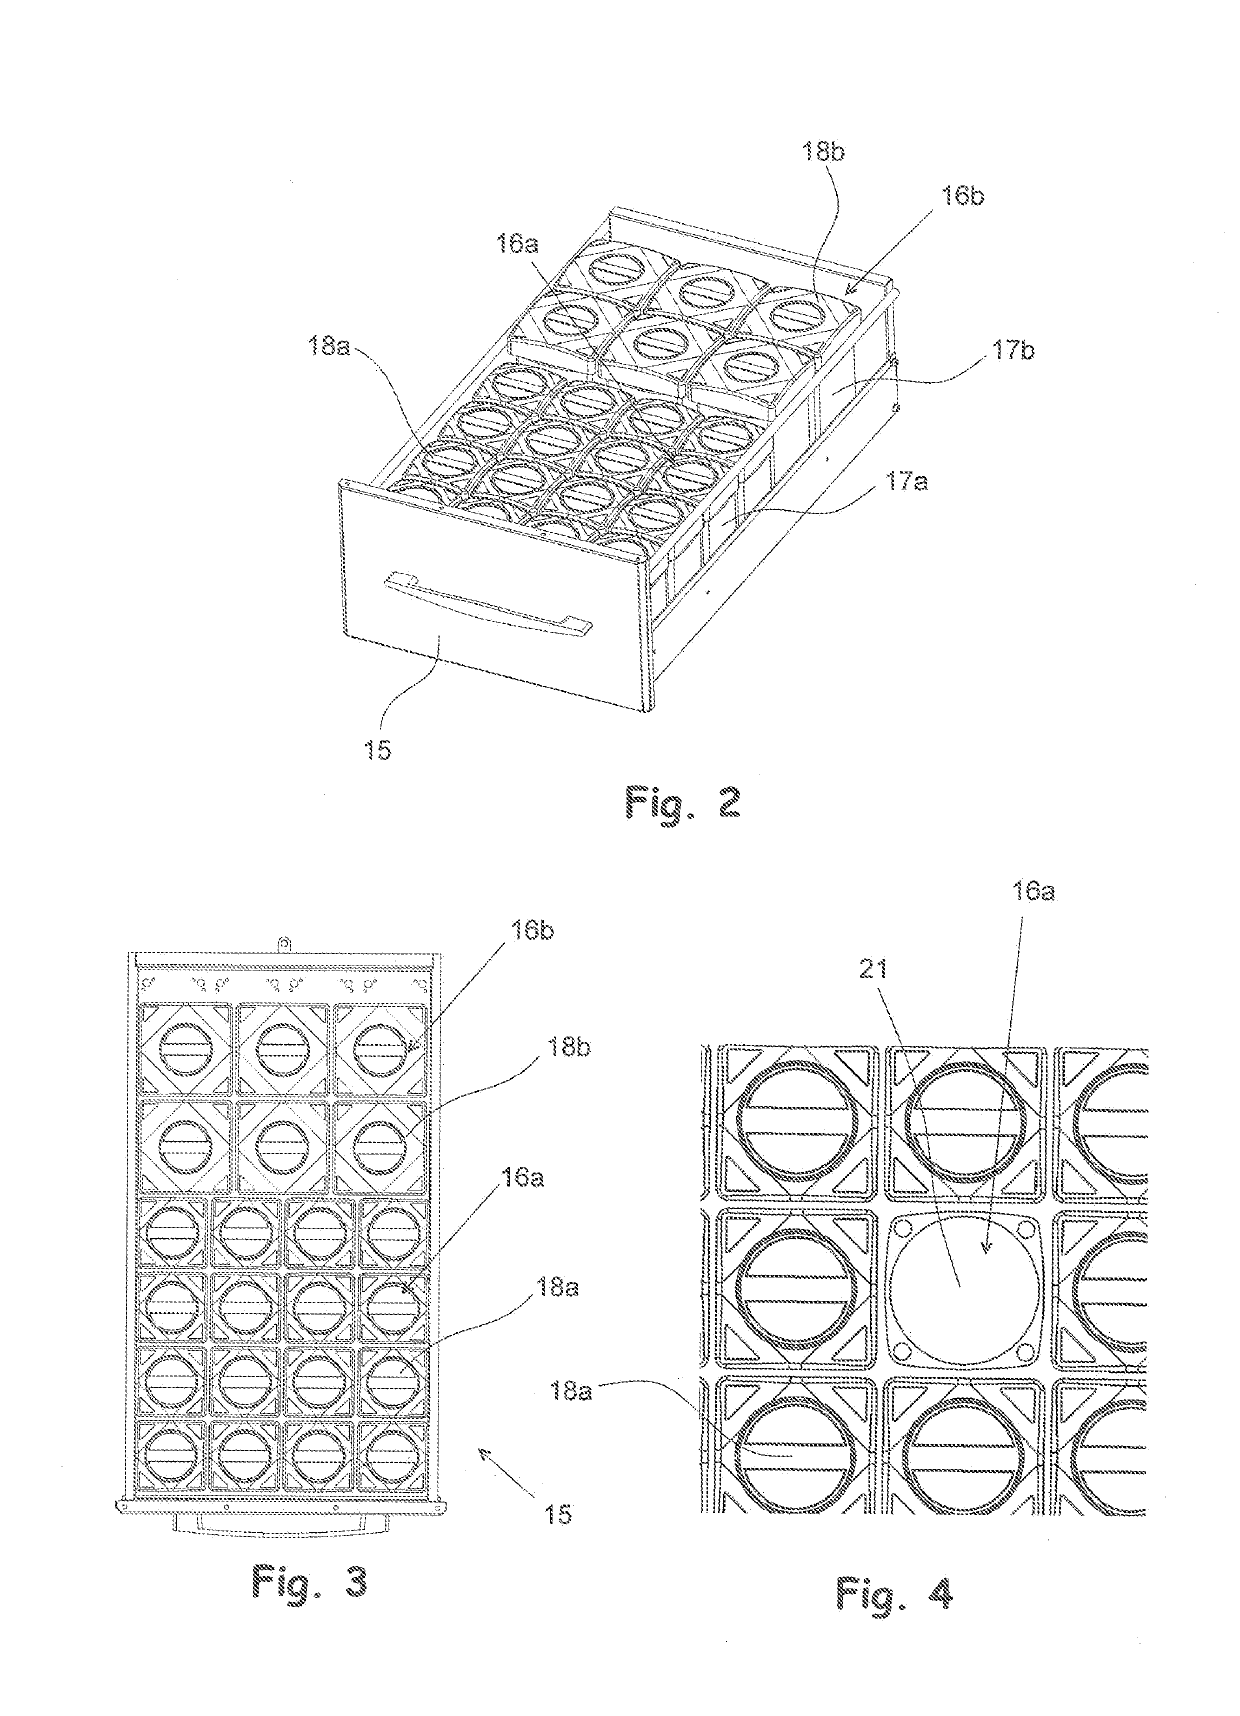 A method and a system for storing drugs in distribution packages, and a storage for drug distribution packages